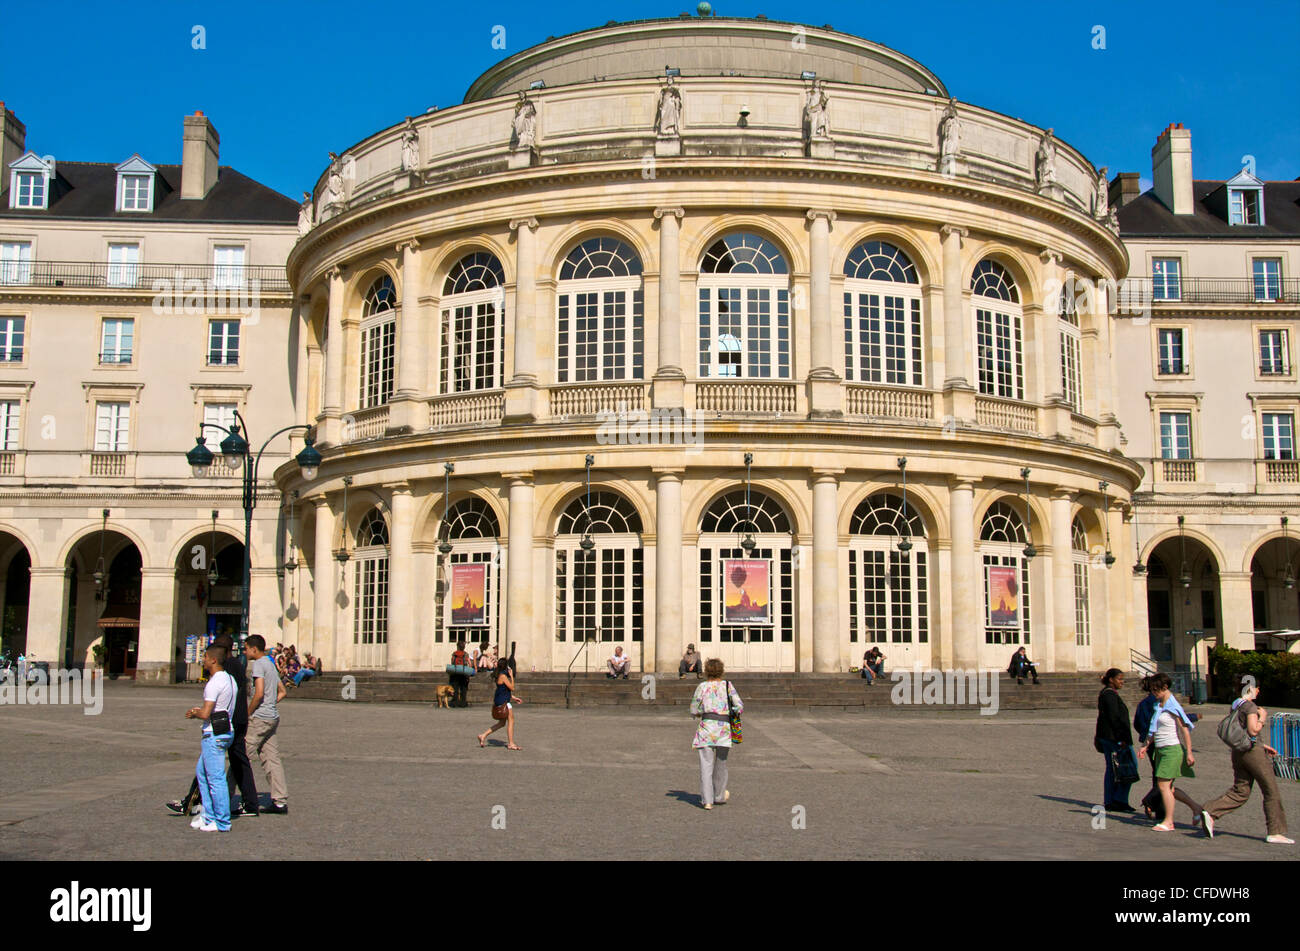 Theater, Mairie square, old Rennes, Brittany, France, Europe Stock Photo